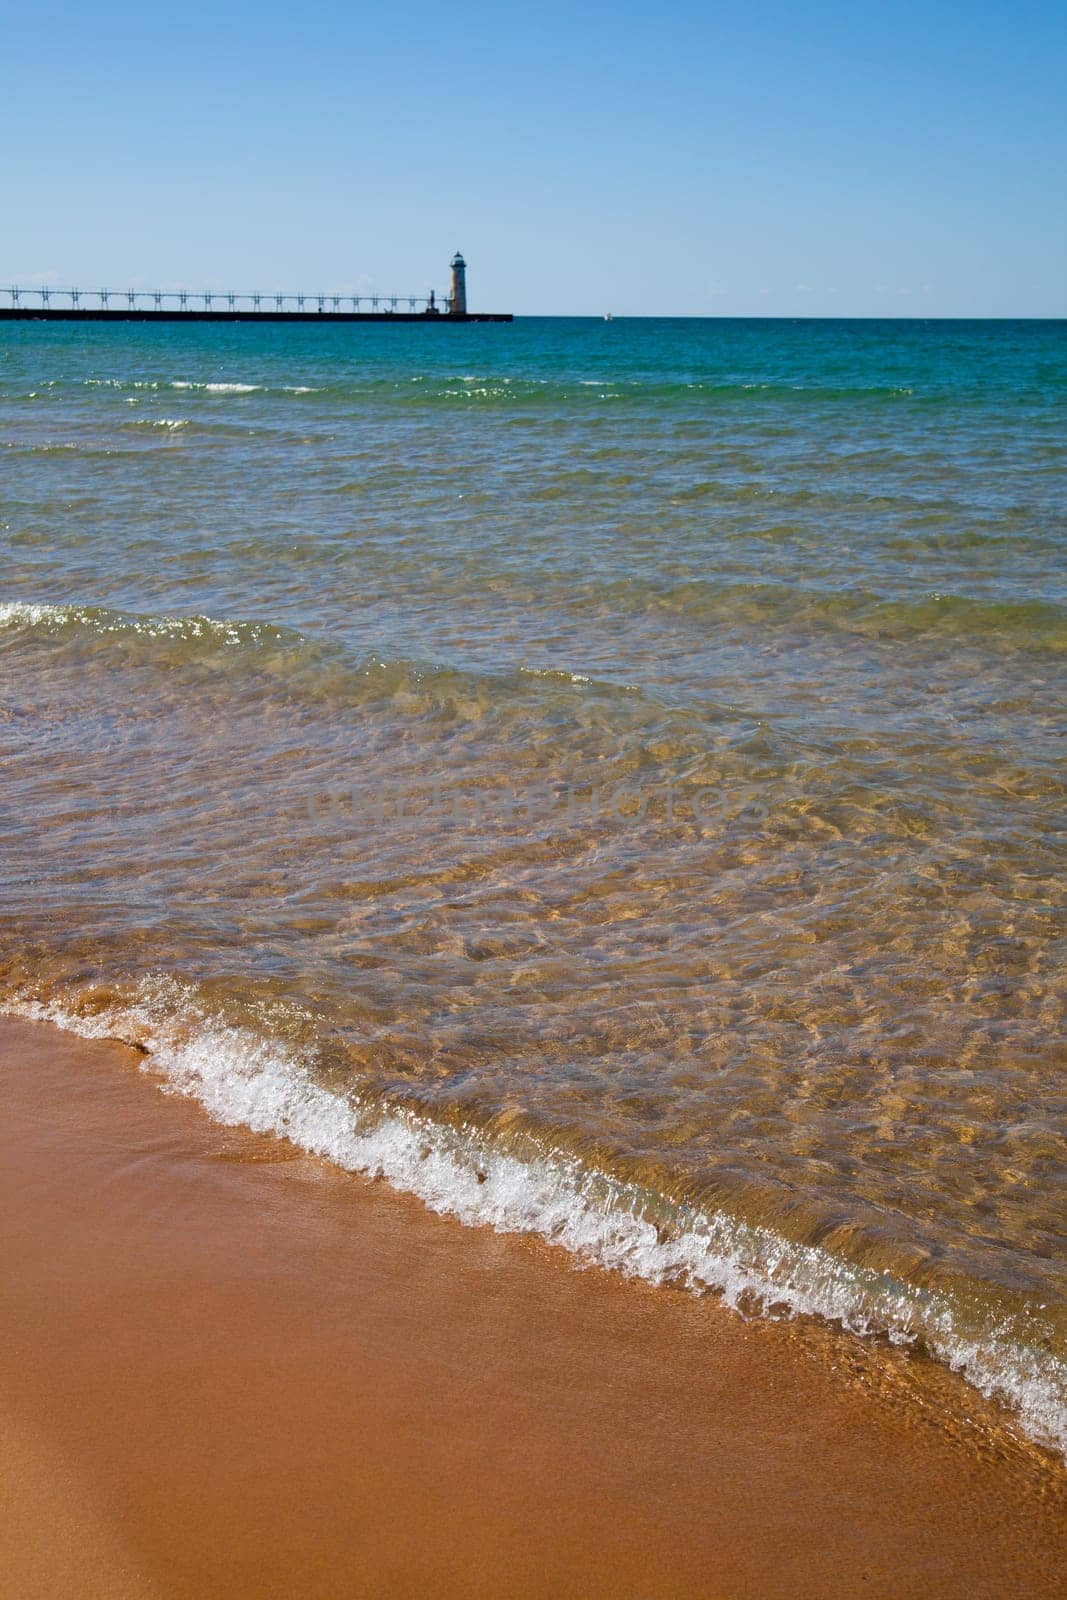 Serene Lake Michigan Shoreline with Golden Sand and Classic Lighthouse by njproductions